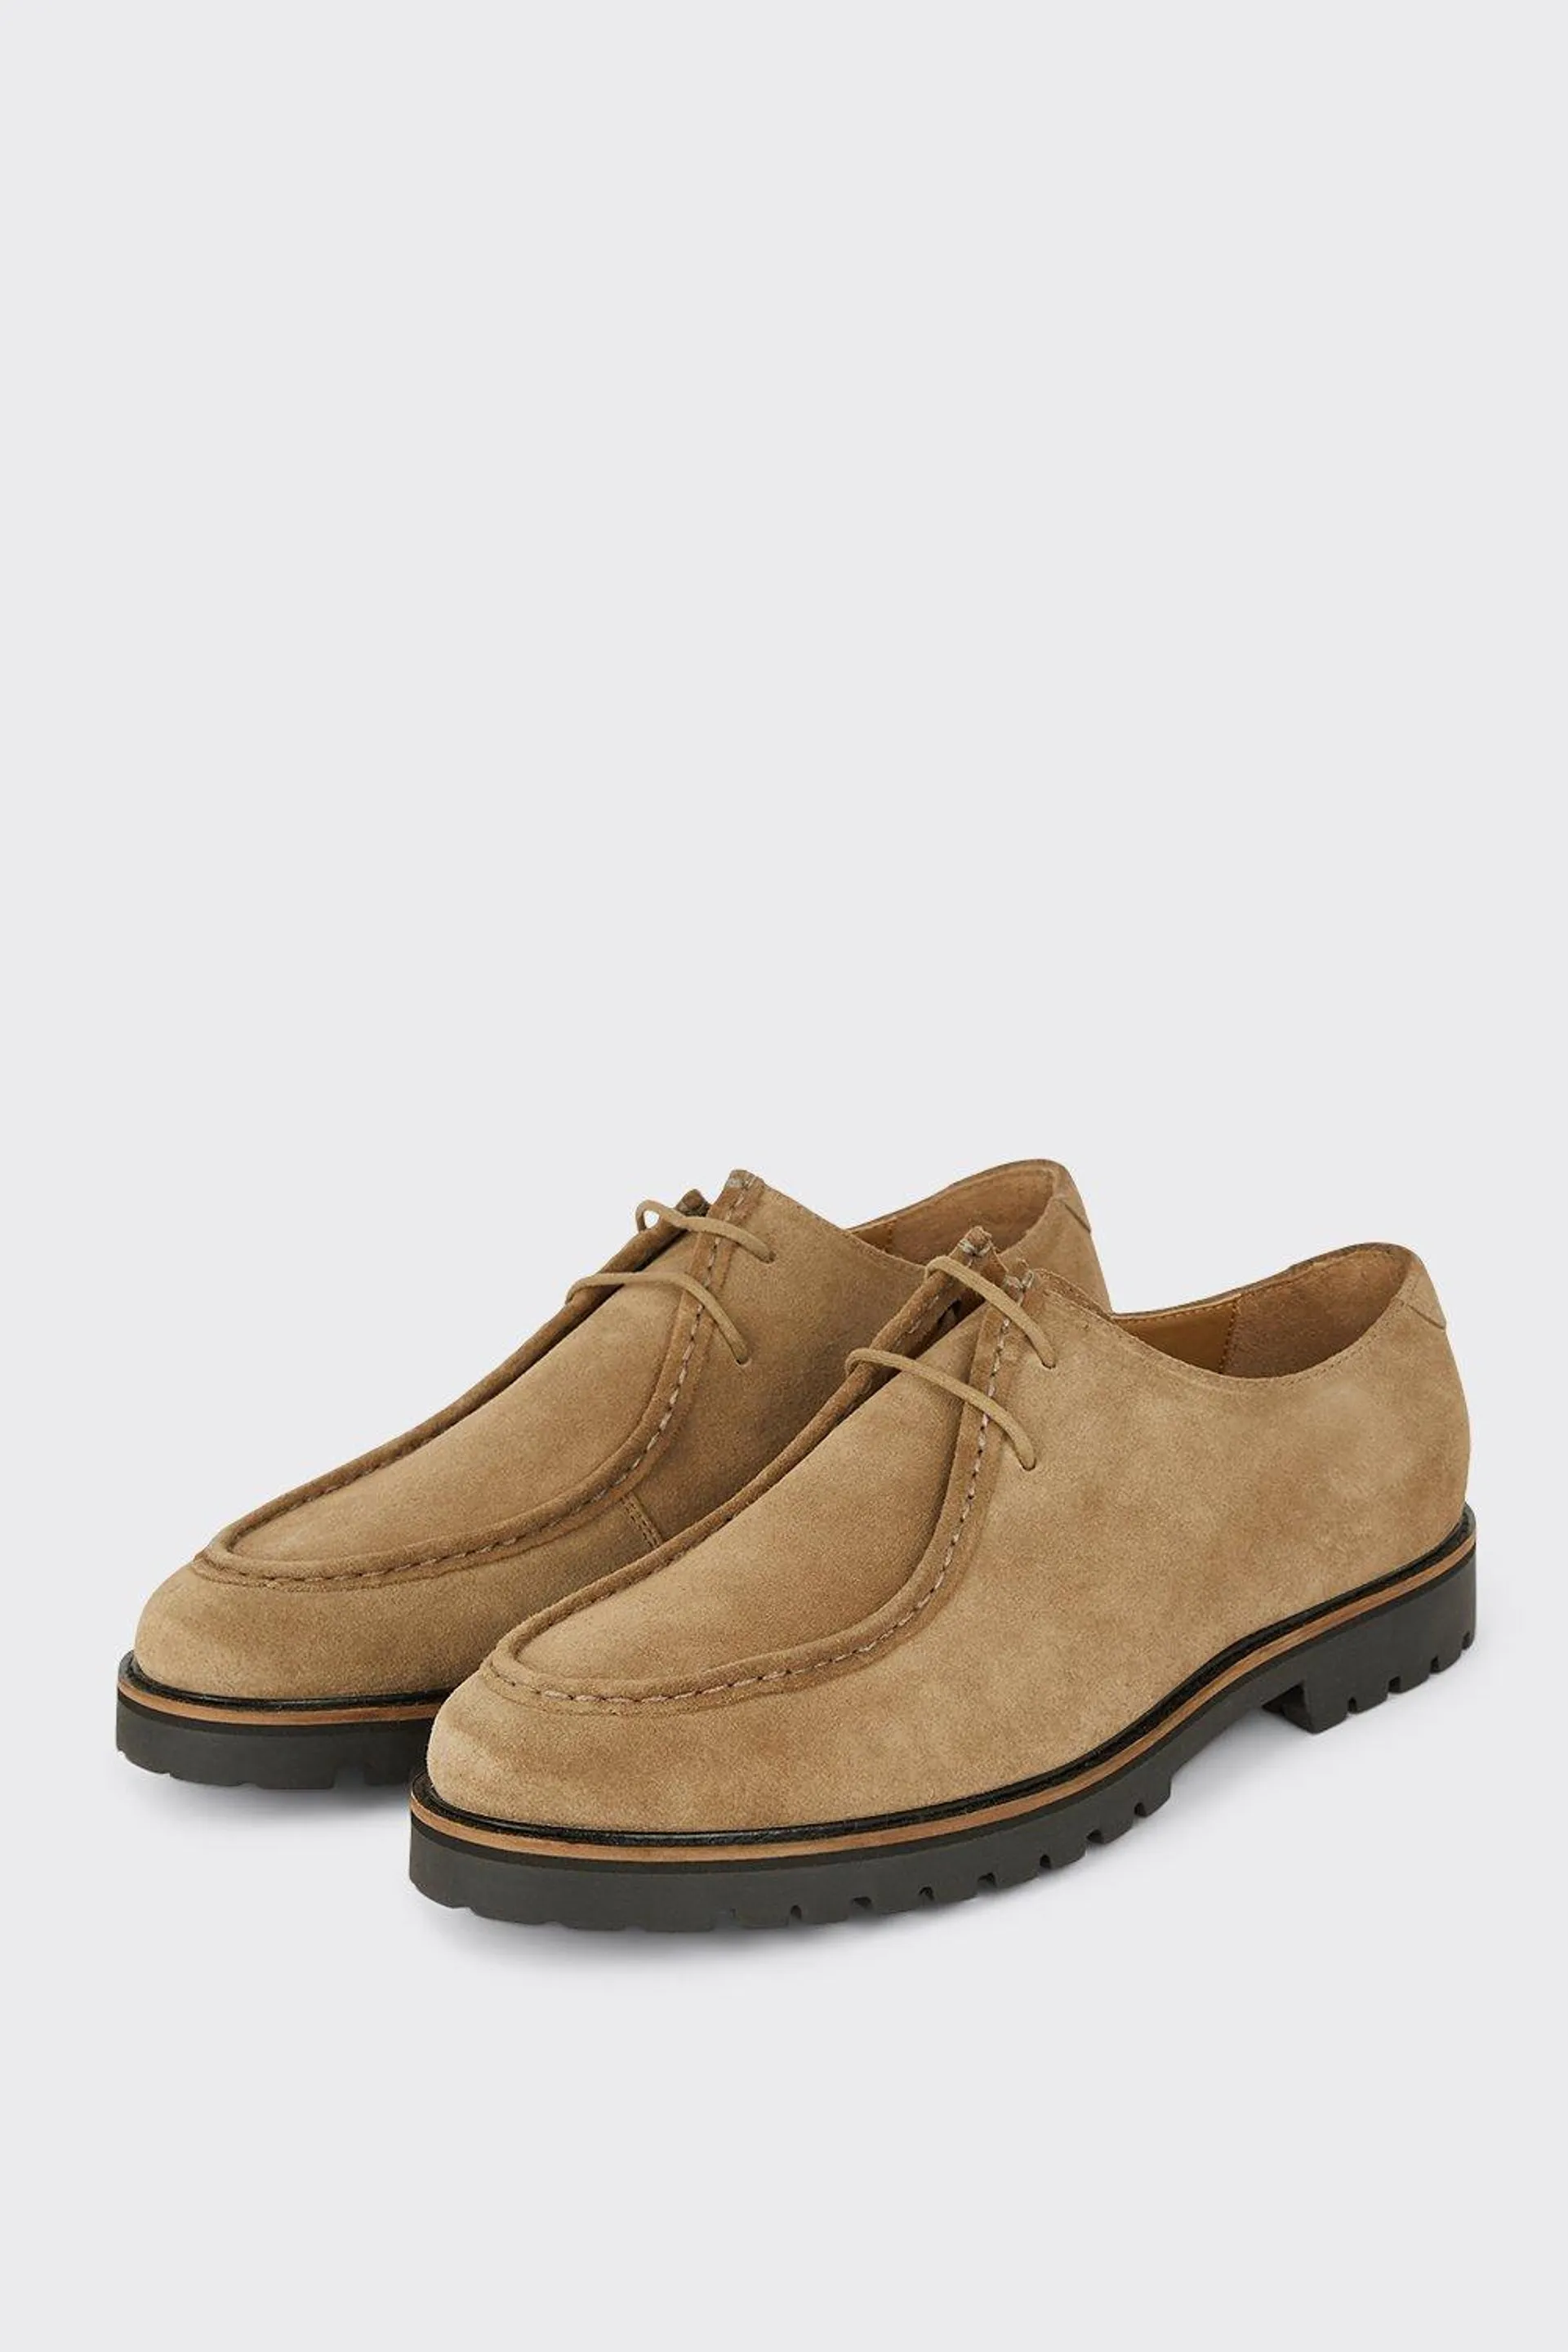 Suede Beige Boat Shoes